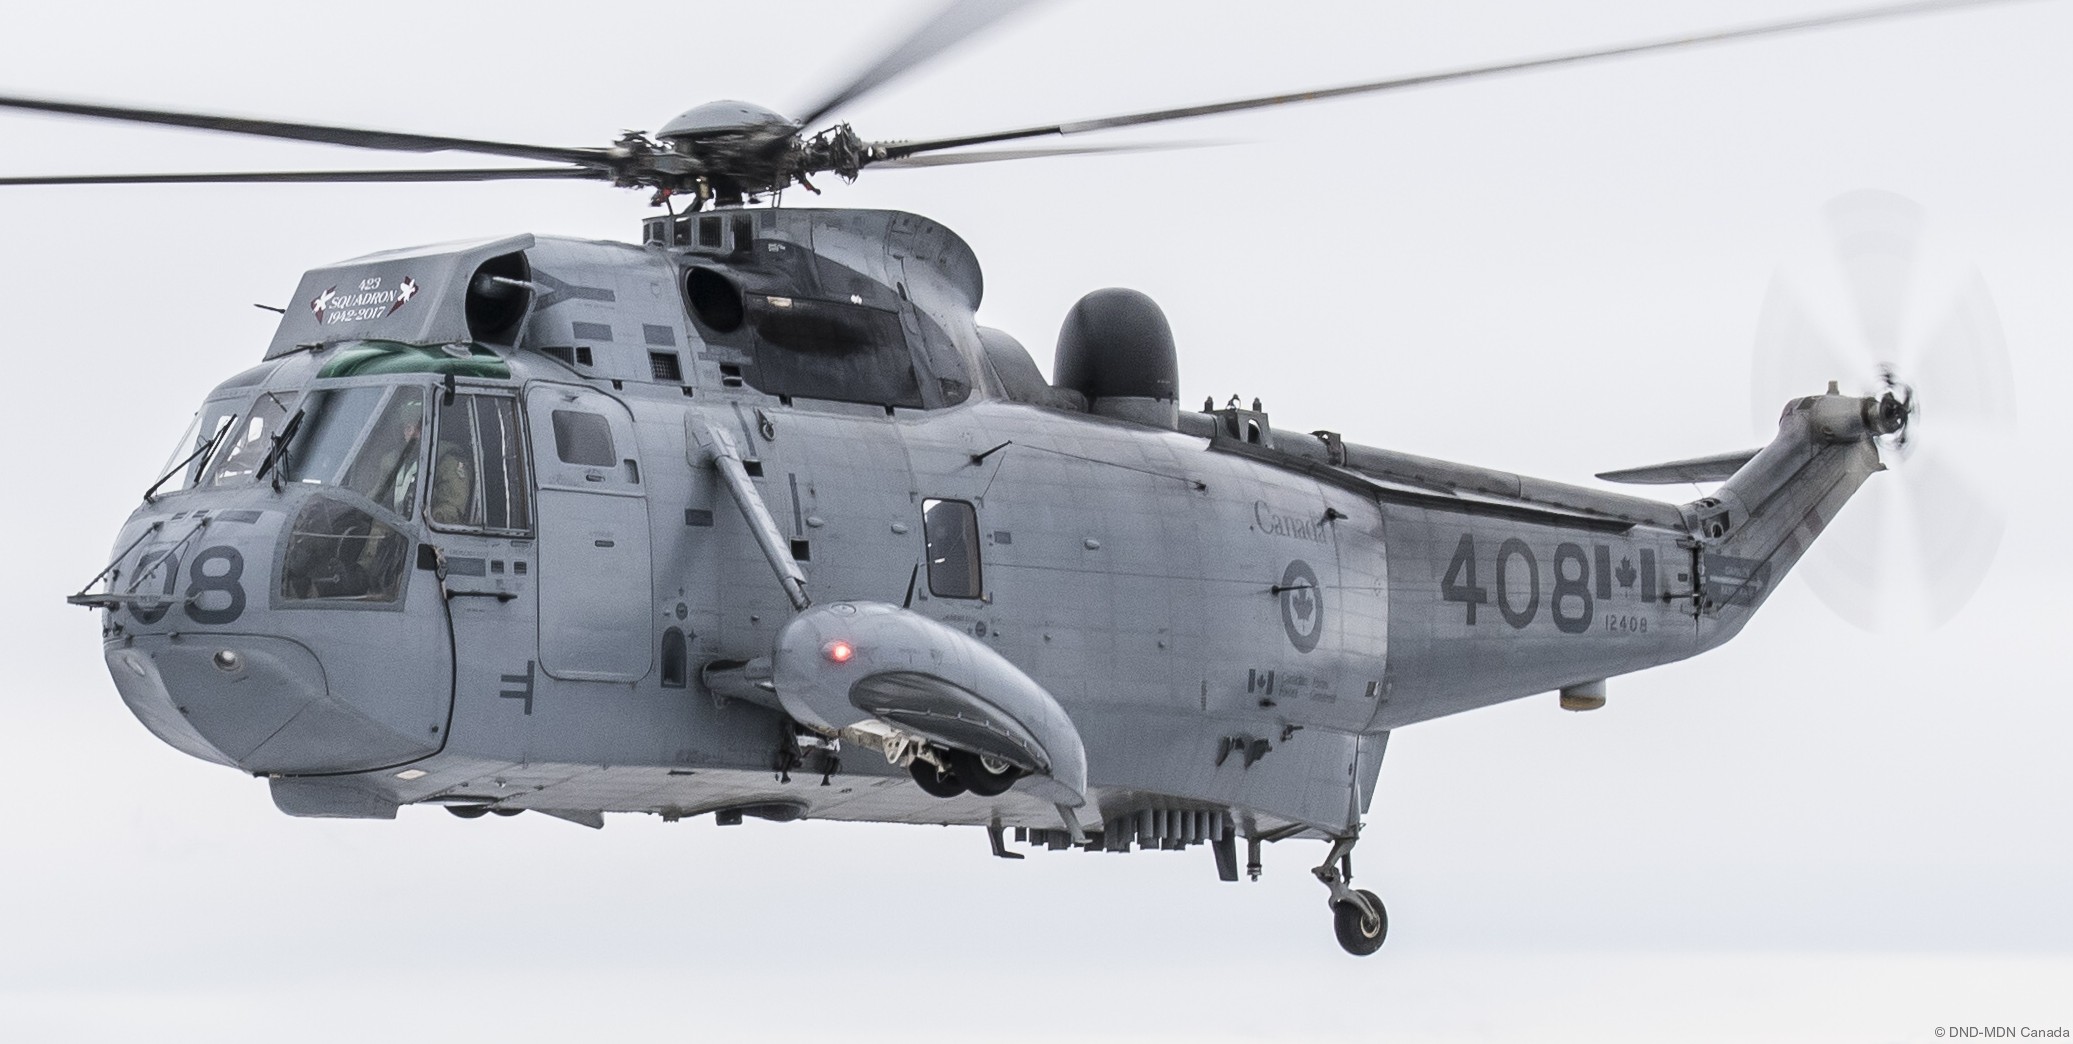 ch-124 sea king royal canadian navy sikorsky naval helicopter rcaf hmcs squadron 68